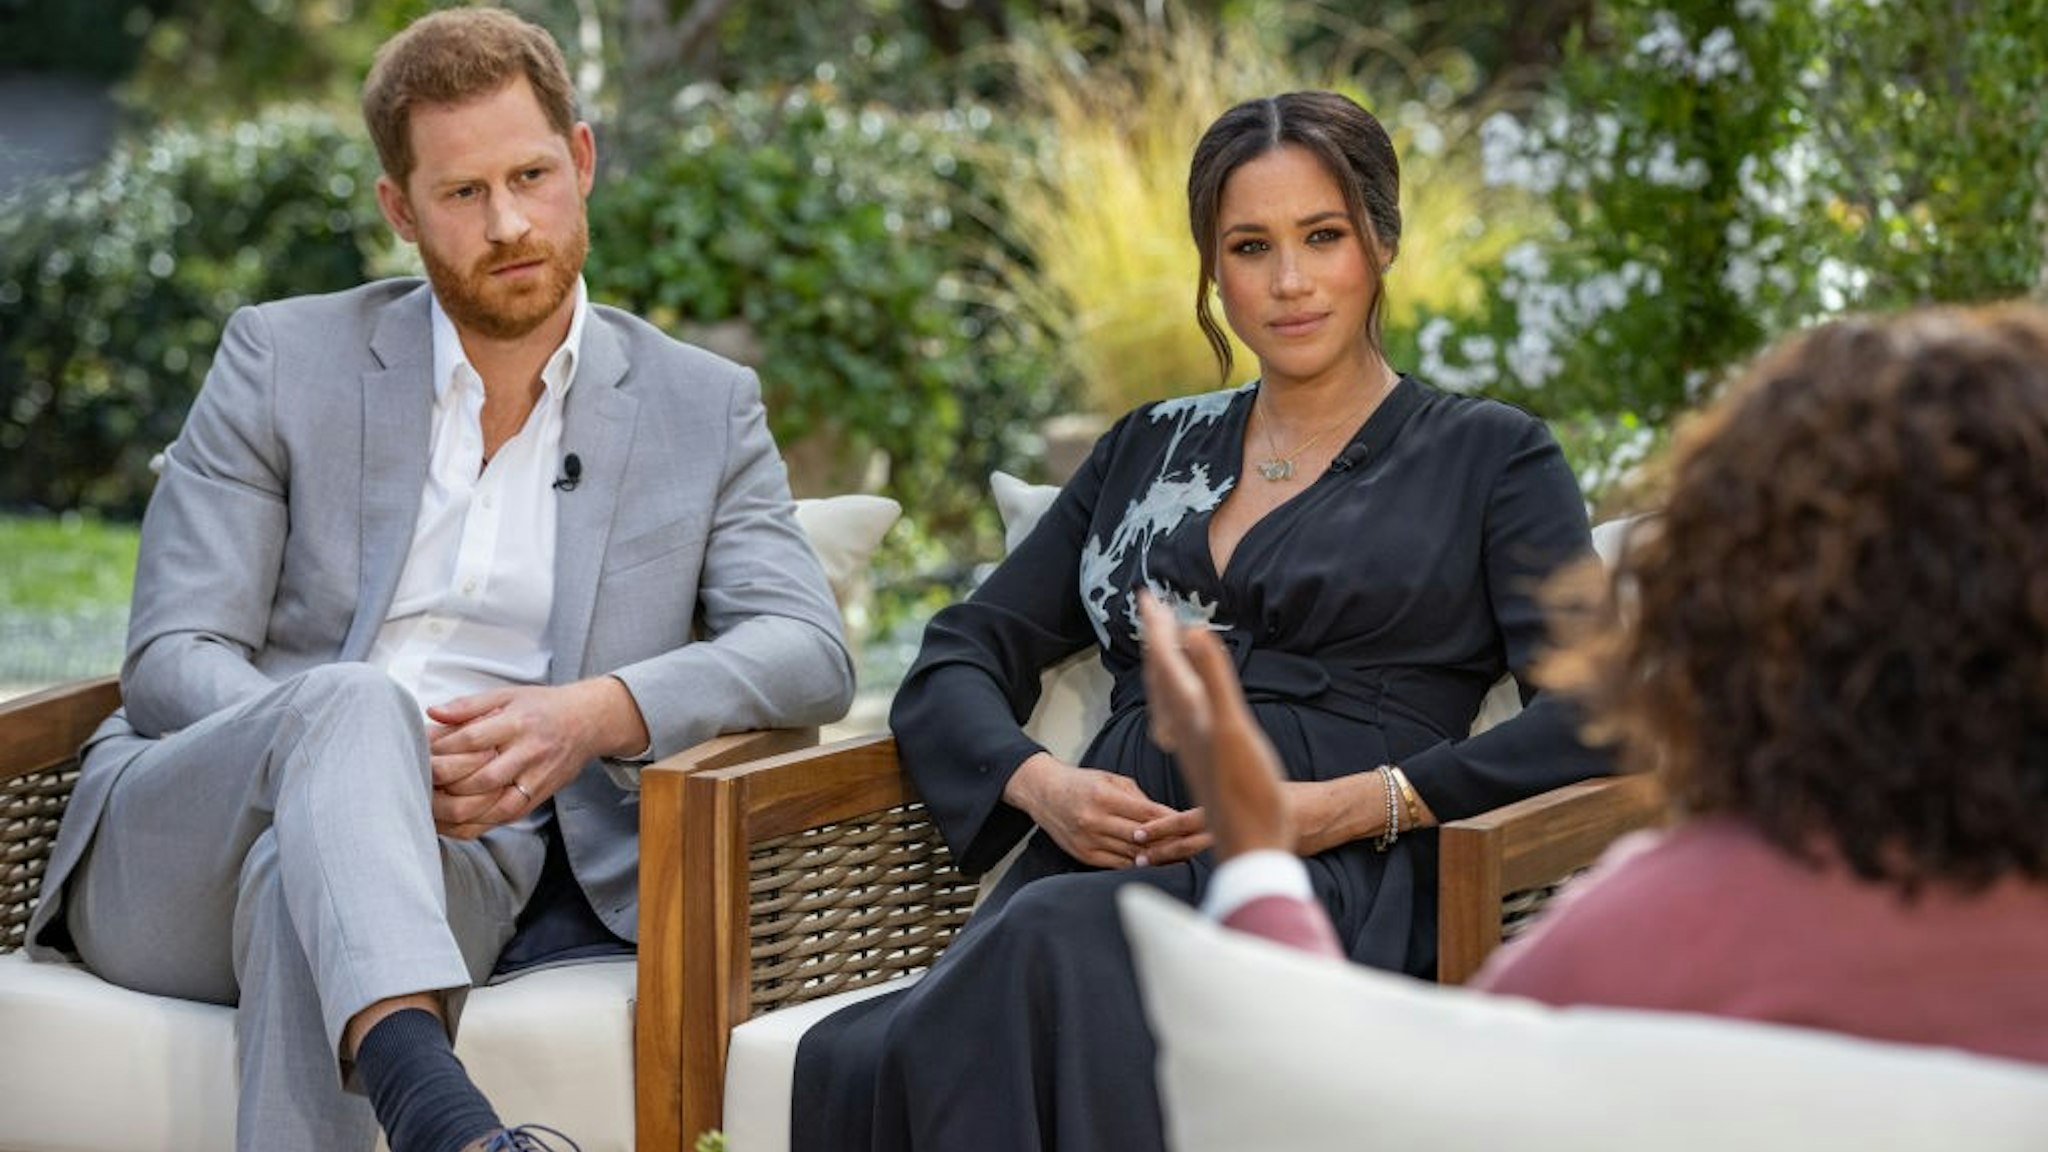 UNSPECIFIED - UNSPECIFIED: In this handout image provided by Harpo Productions and released on March 5, 2021, Oprah Winfrey interviews Prince Harry and Meghan Markle on A CBS Primetime Special premiering on CBS on March 7, 2021. (Photo by